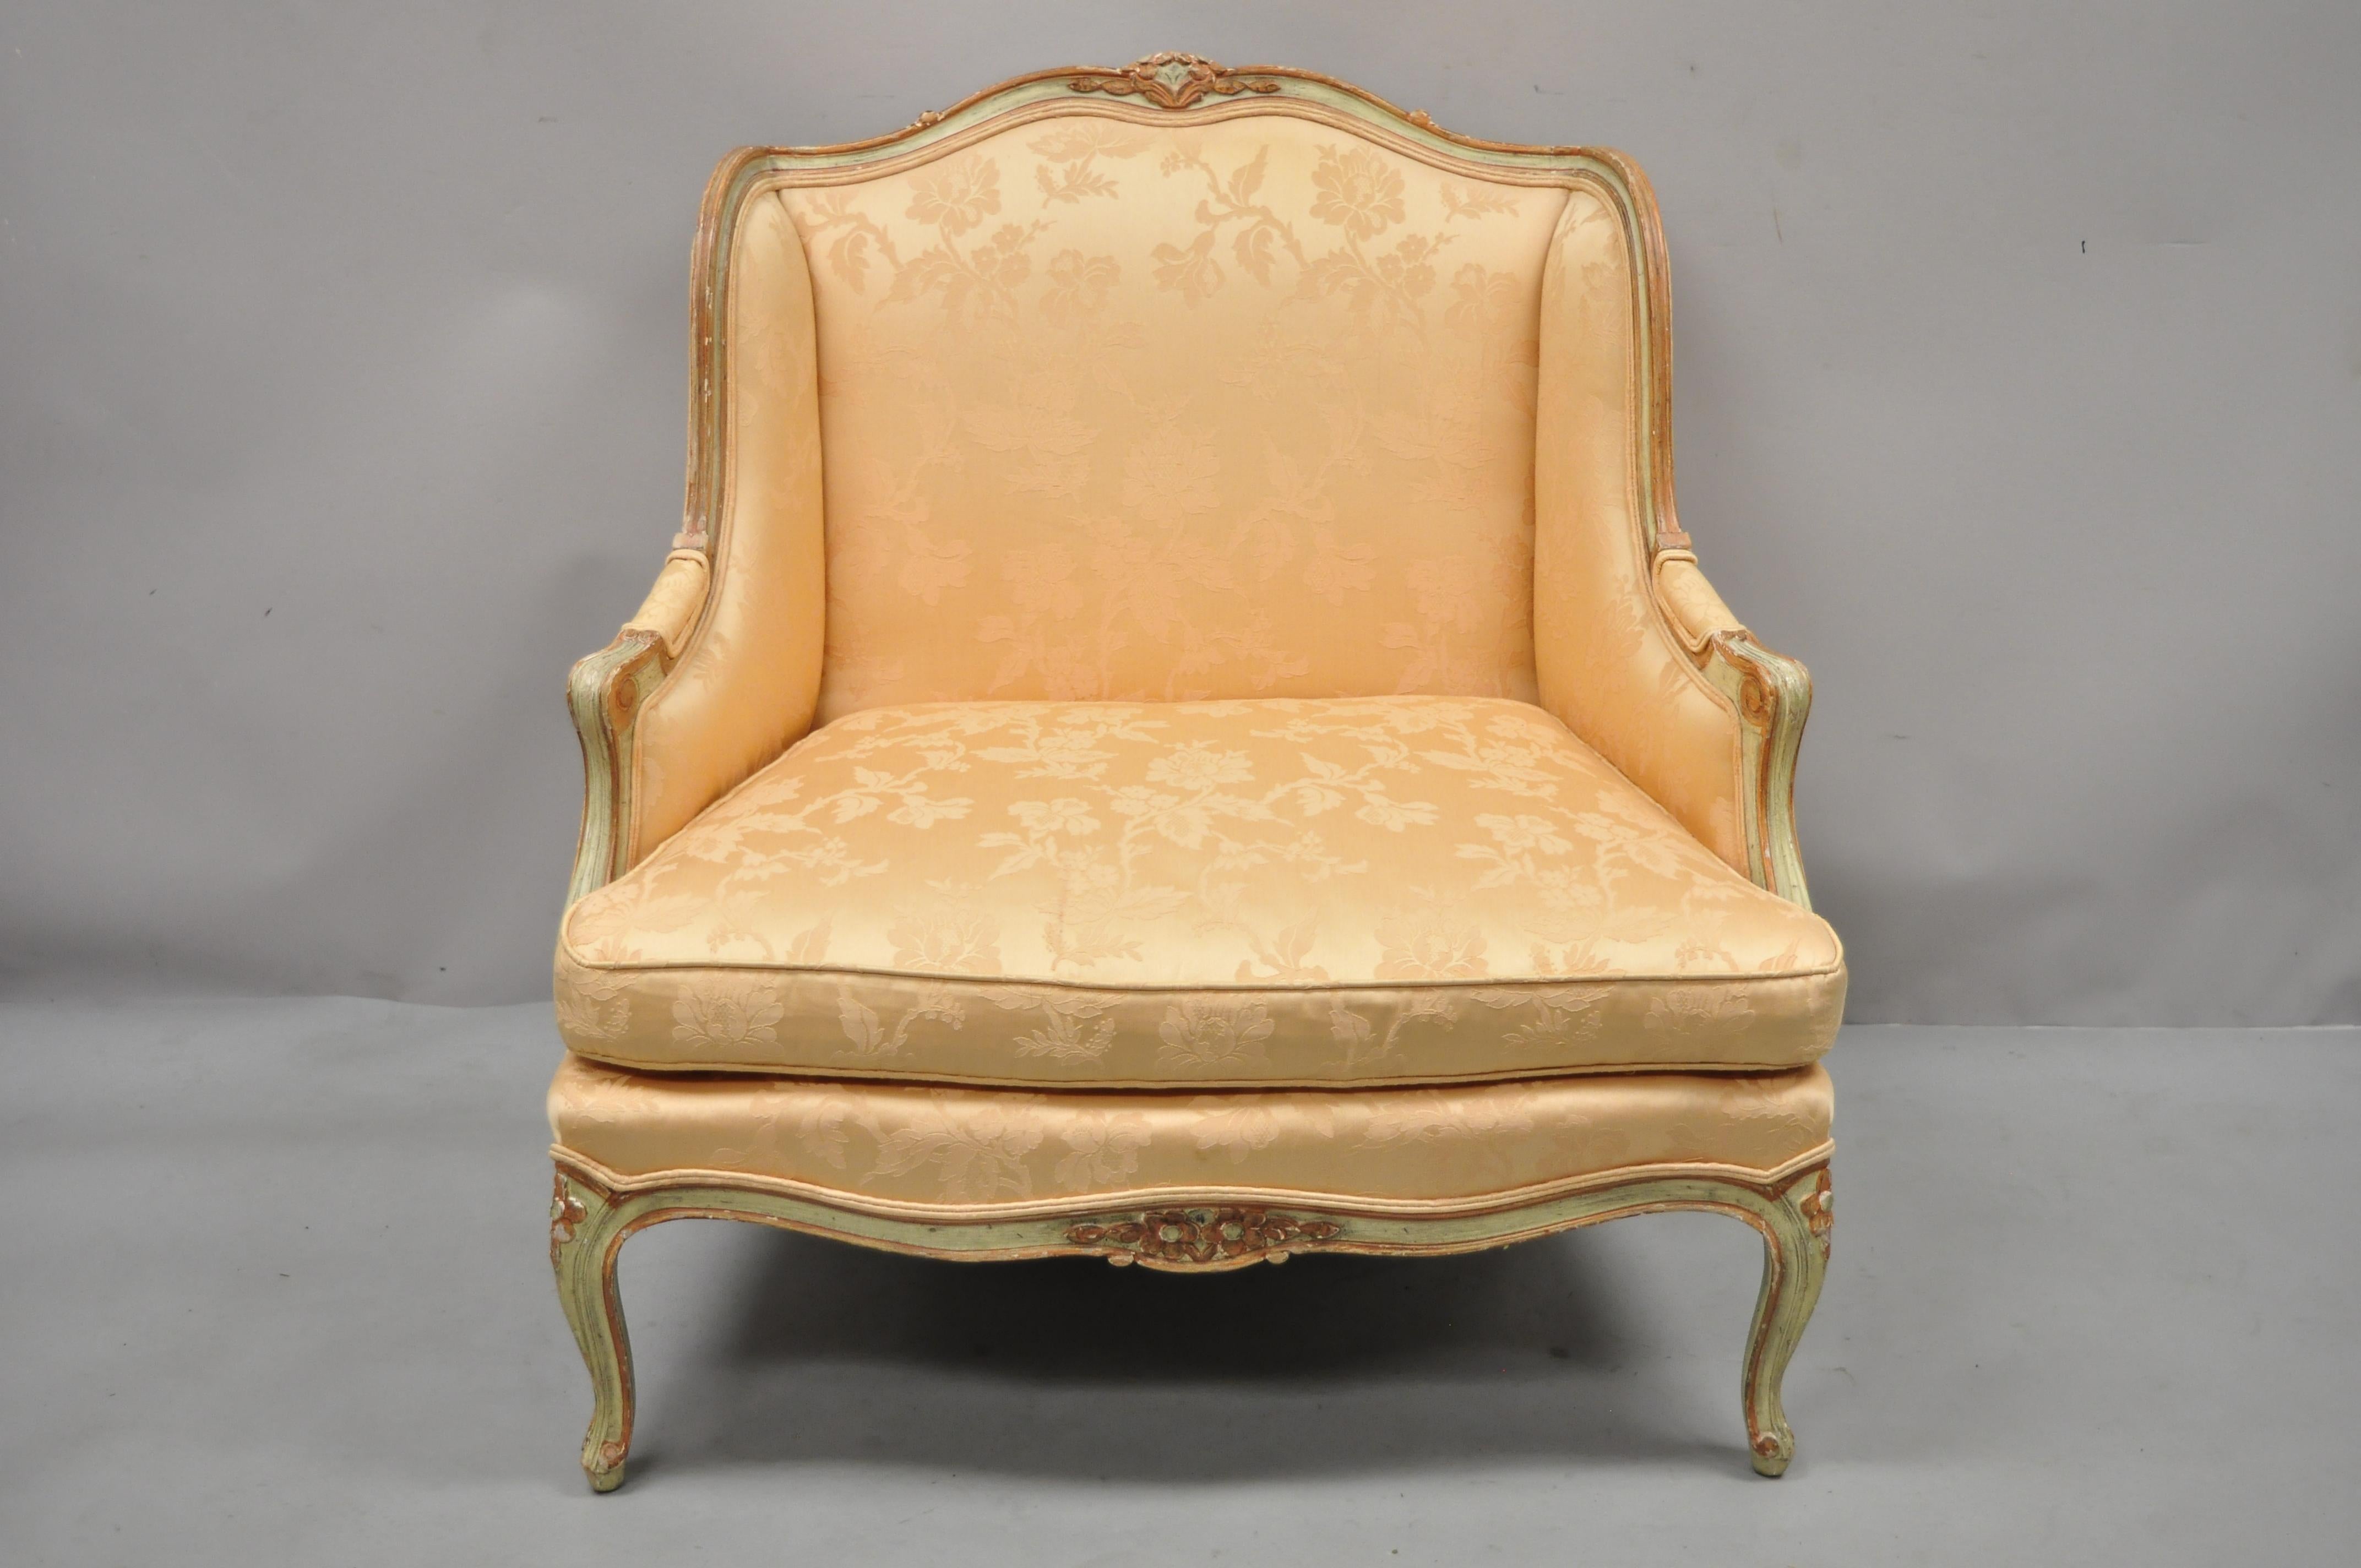 Baker French Louis XV style painted wide wingback bergere settee and ottoman. (1) wide frame wingback bergere lounge chair, (1) wide curved ottoman, solid wood frame, distressed finish, original label, quality American craftsmanship, great style and